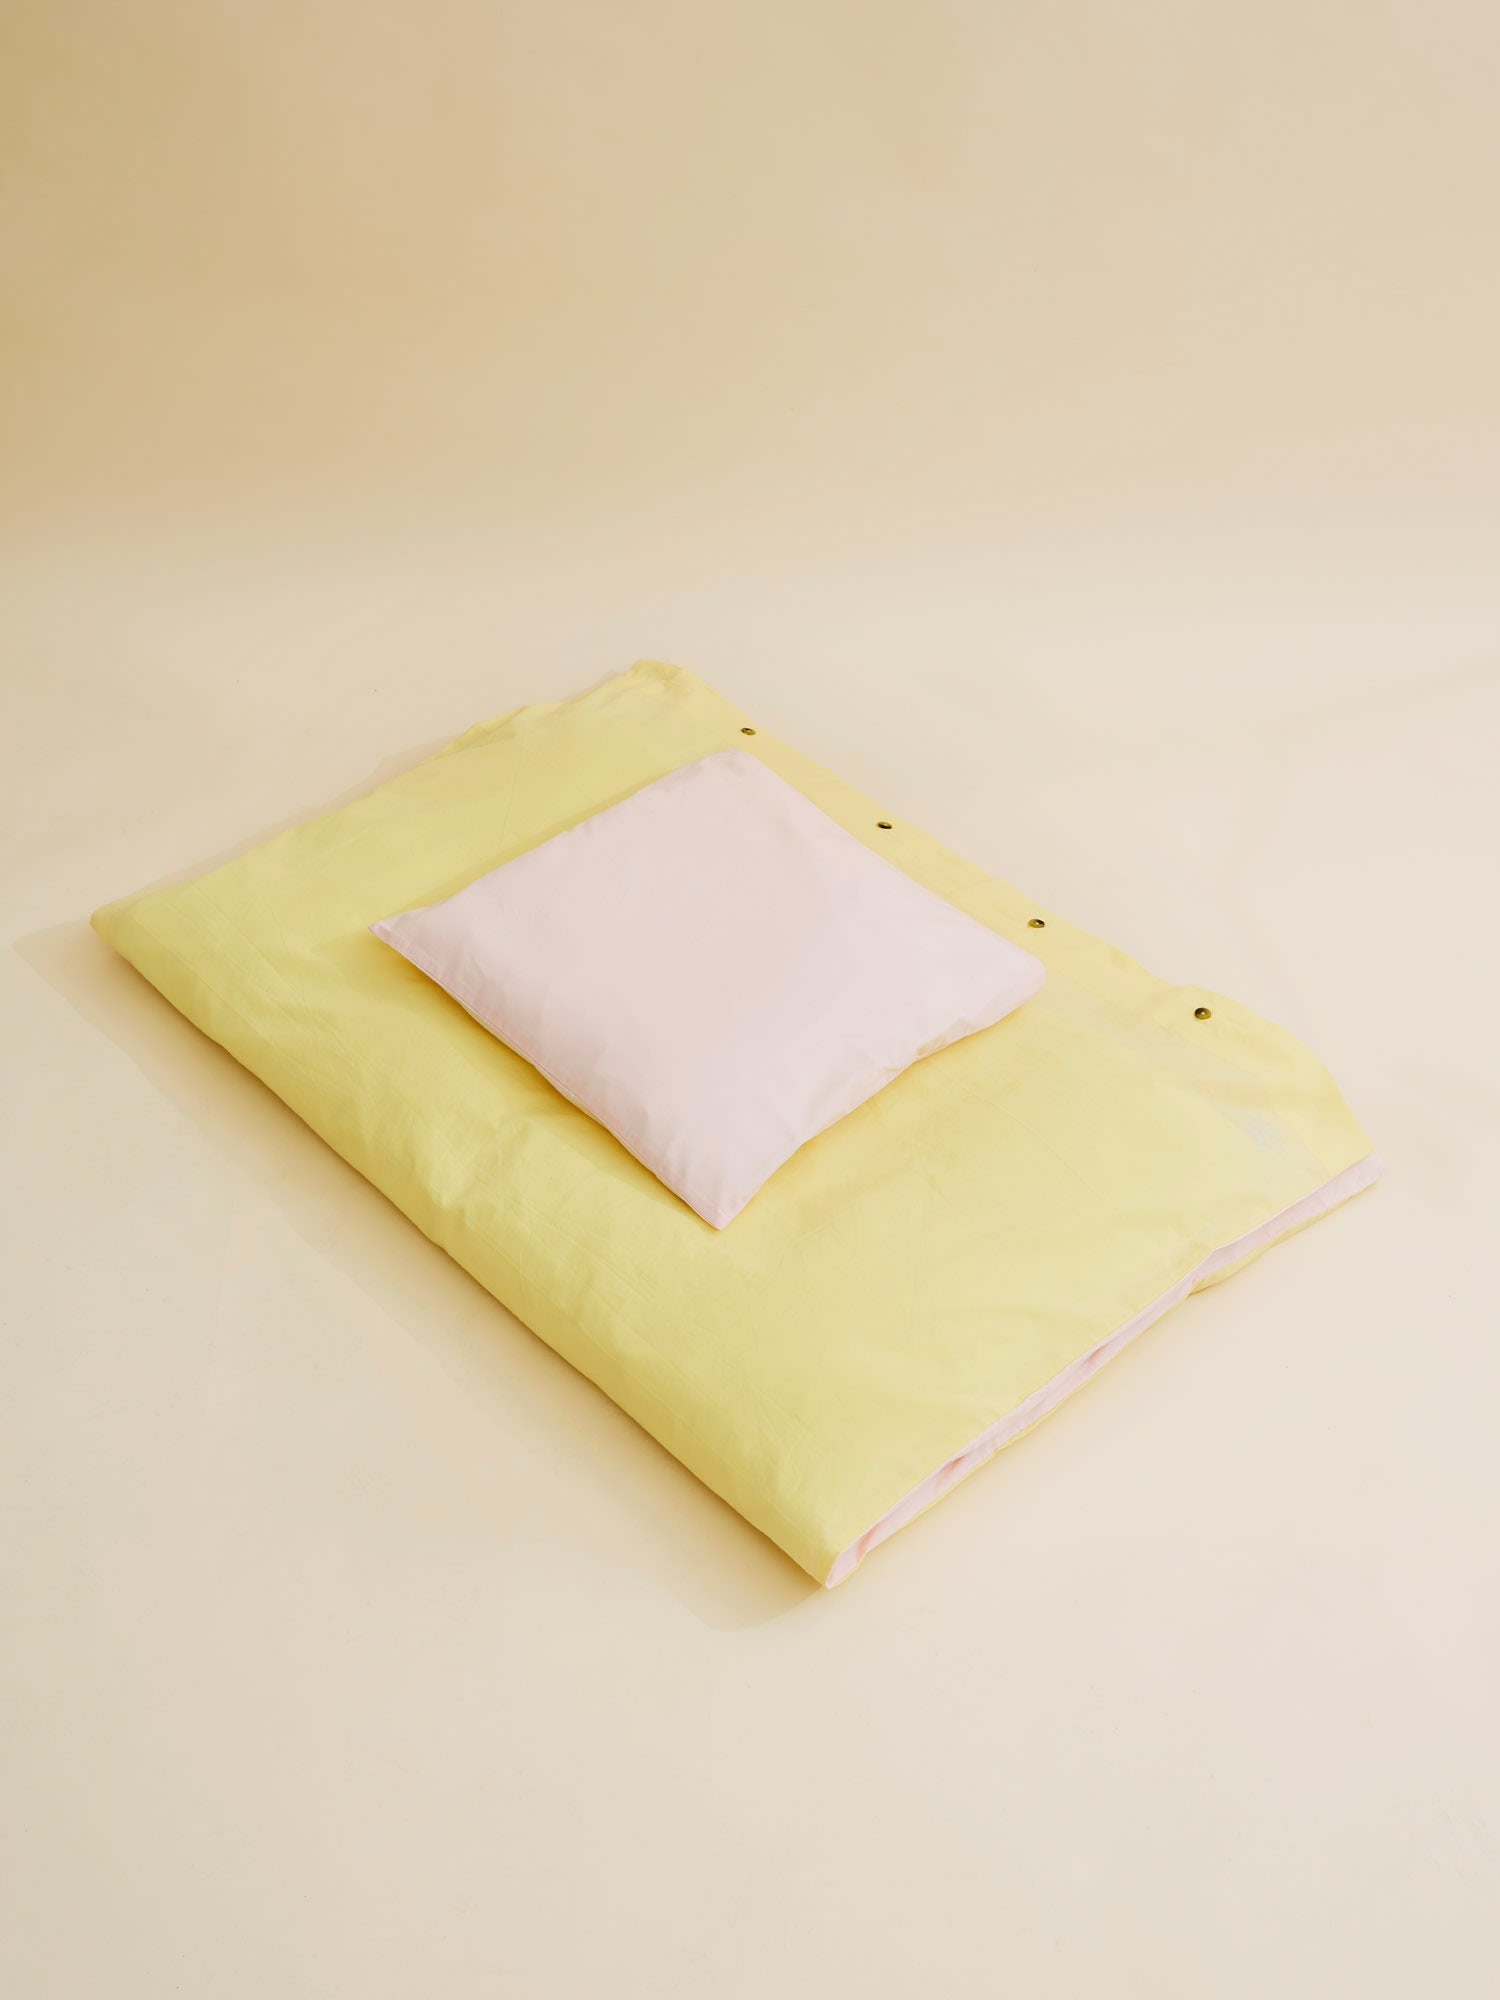 FUTURE BABY BED LINEN 110*125/35*55 (SE)* - SOFT PINK/ LT. YELLOW